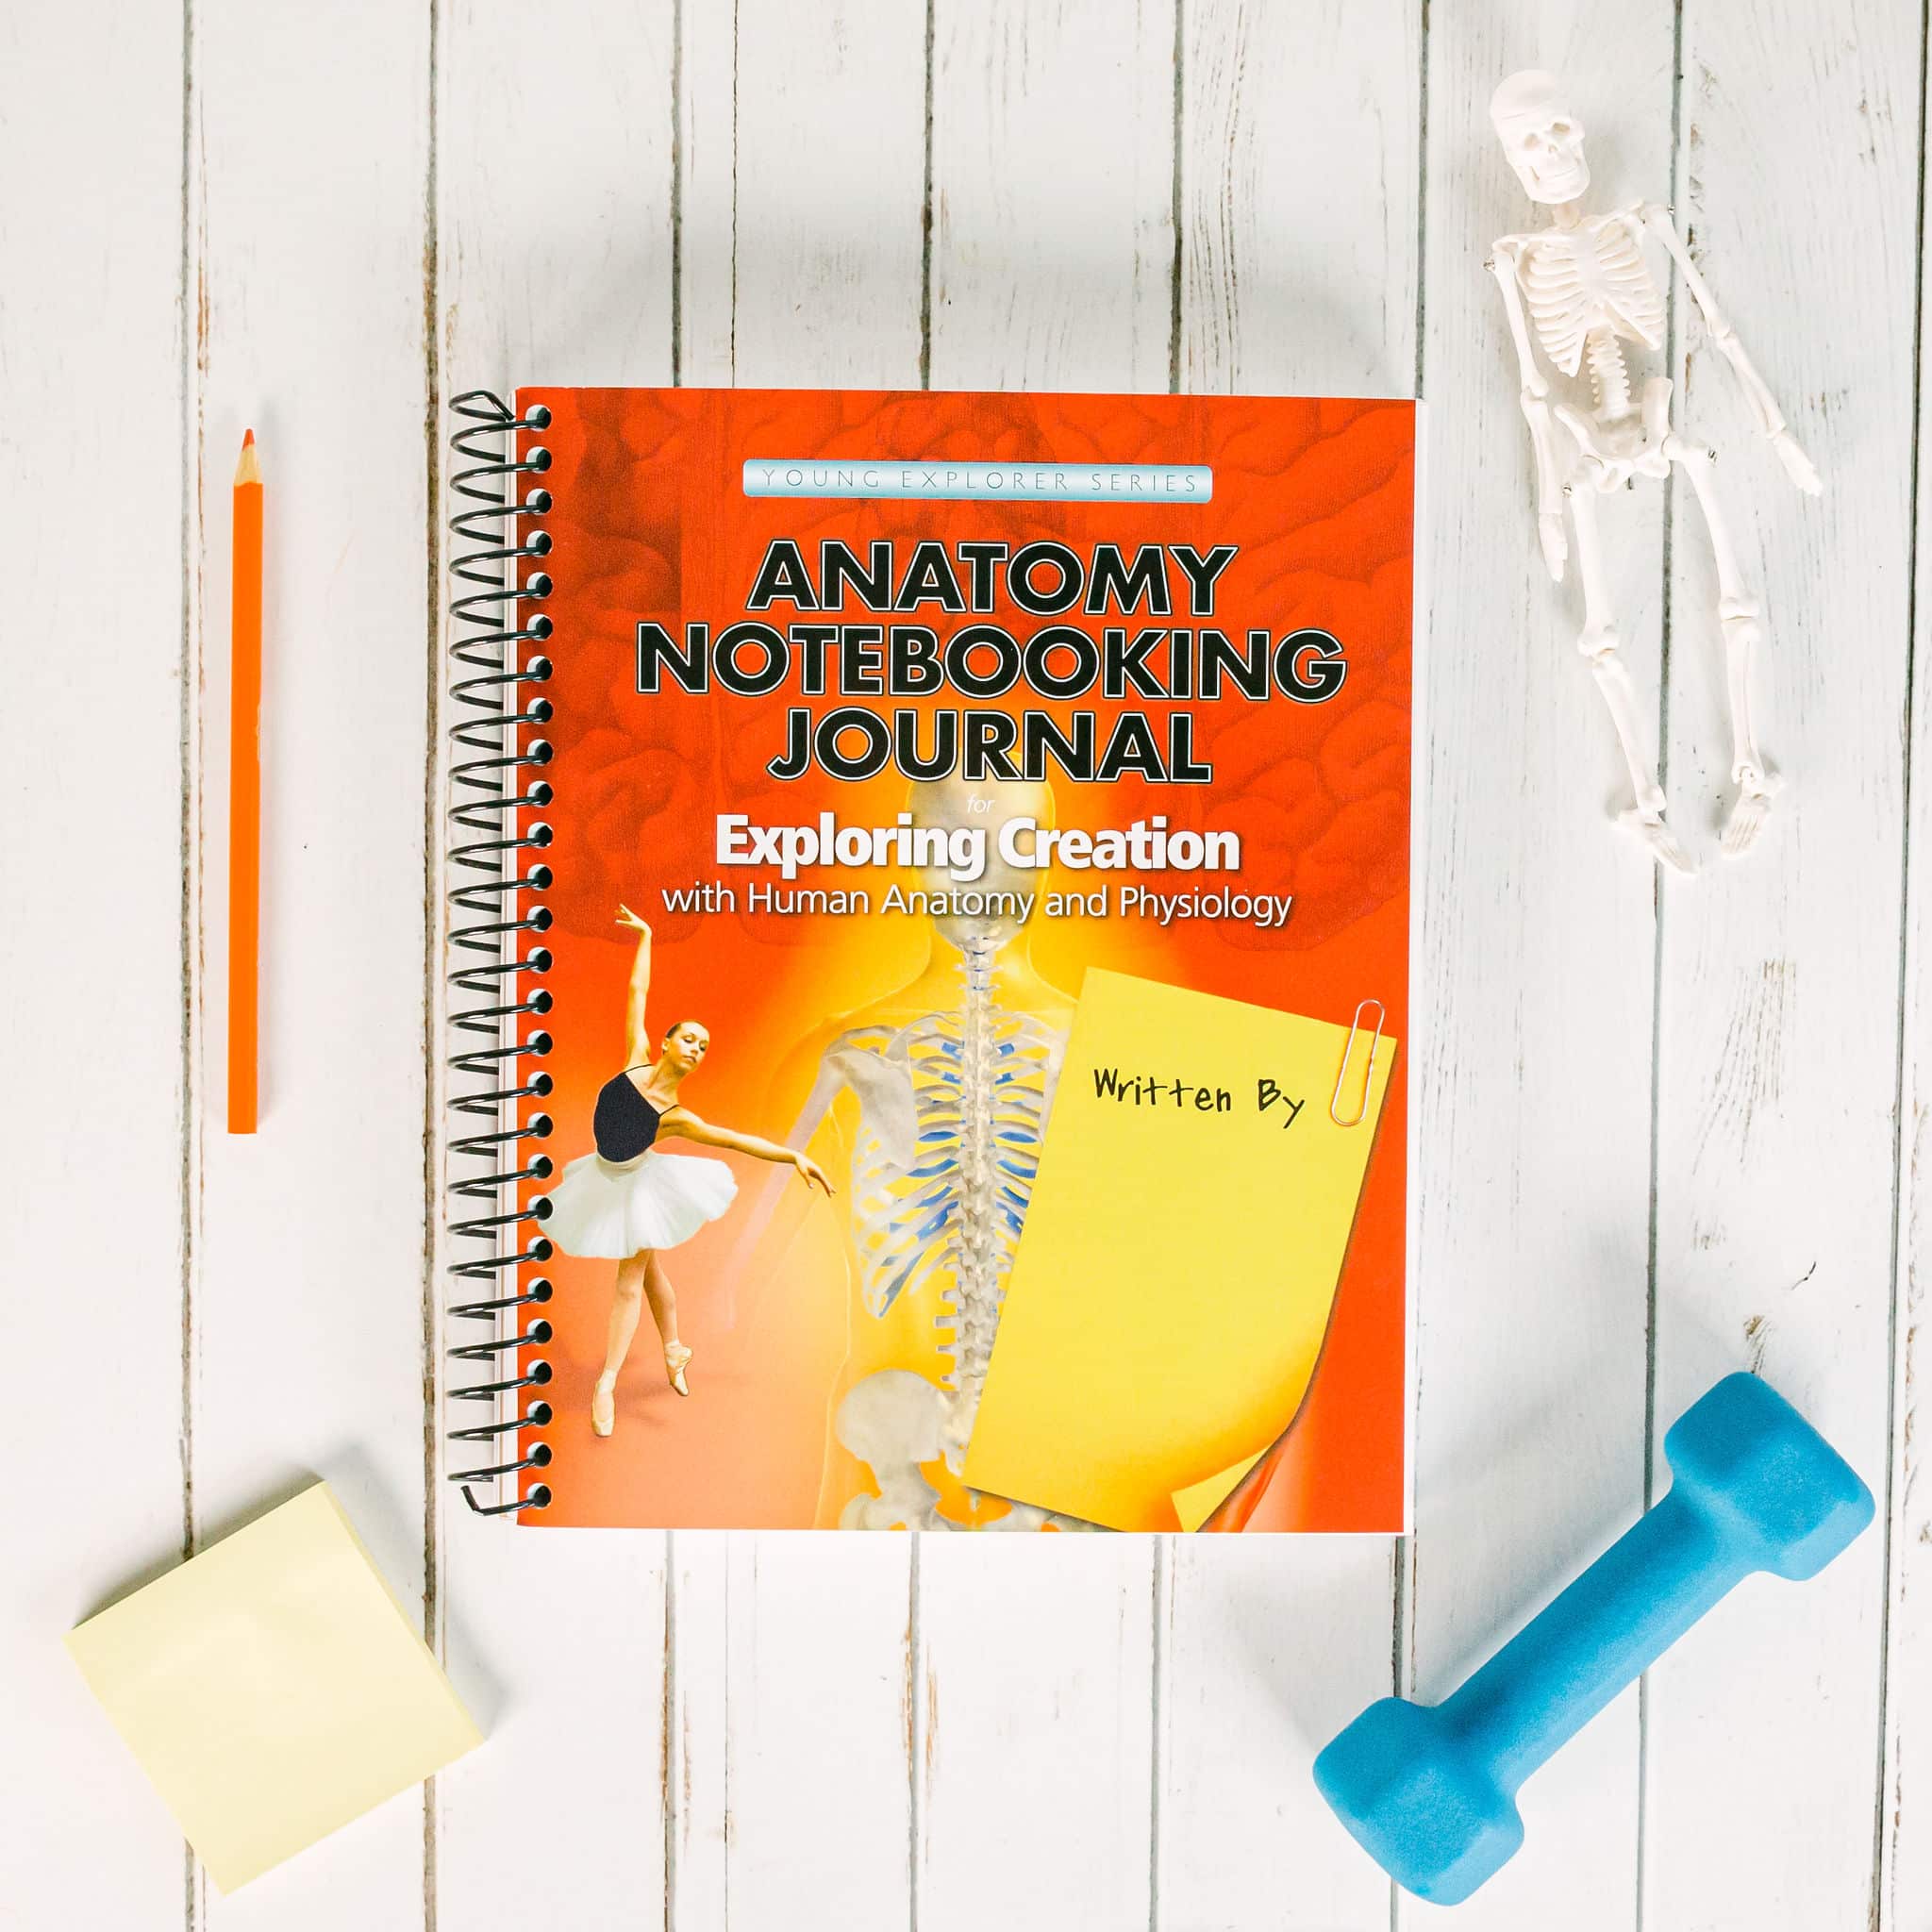 Anatomy and Physiology Notebooking Journal